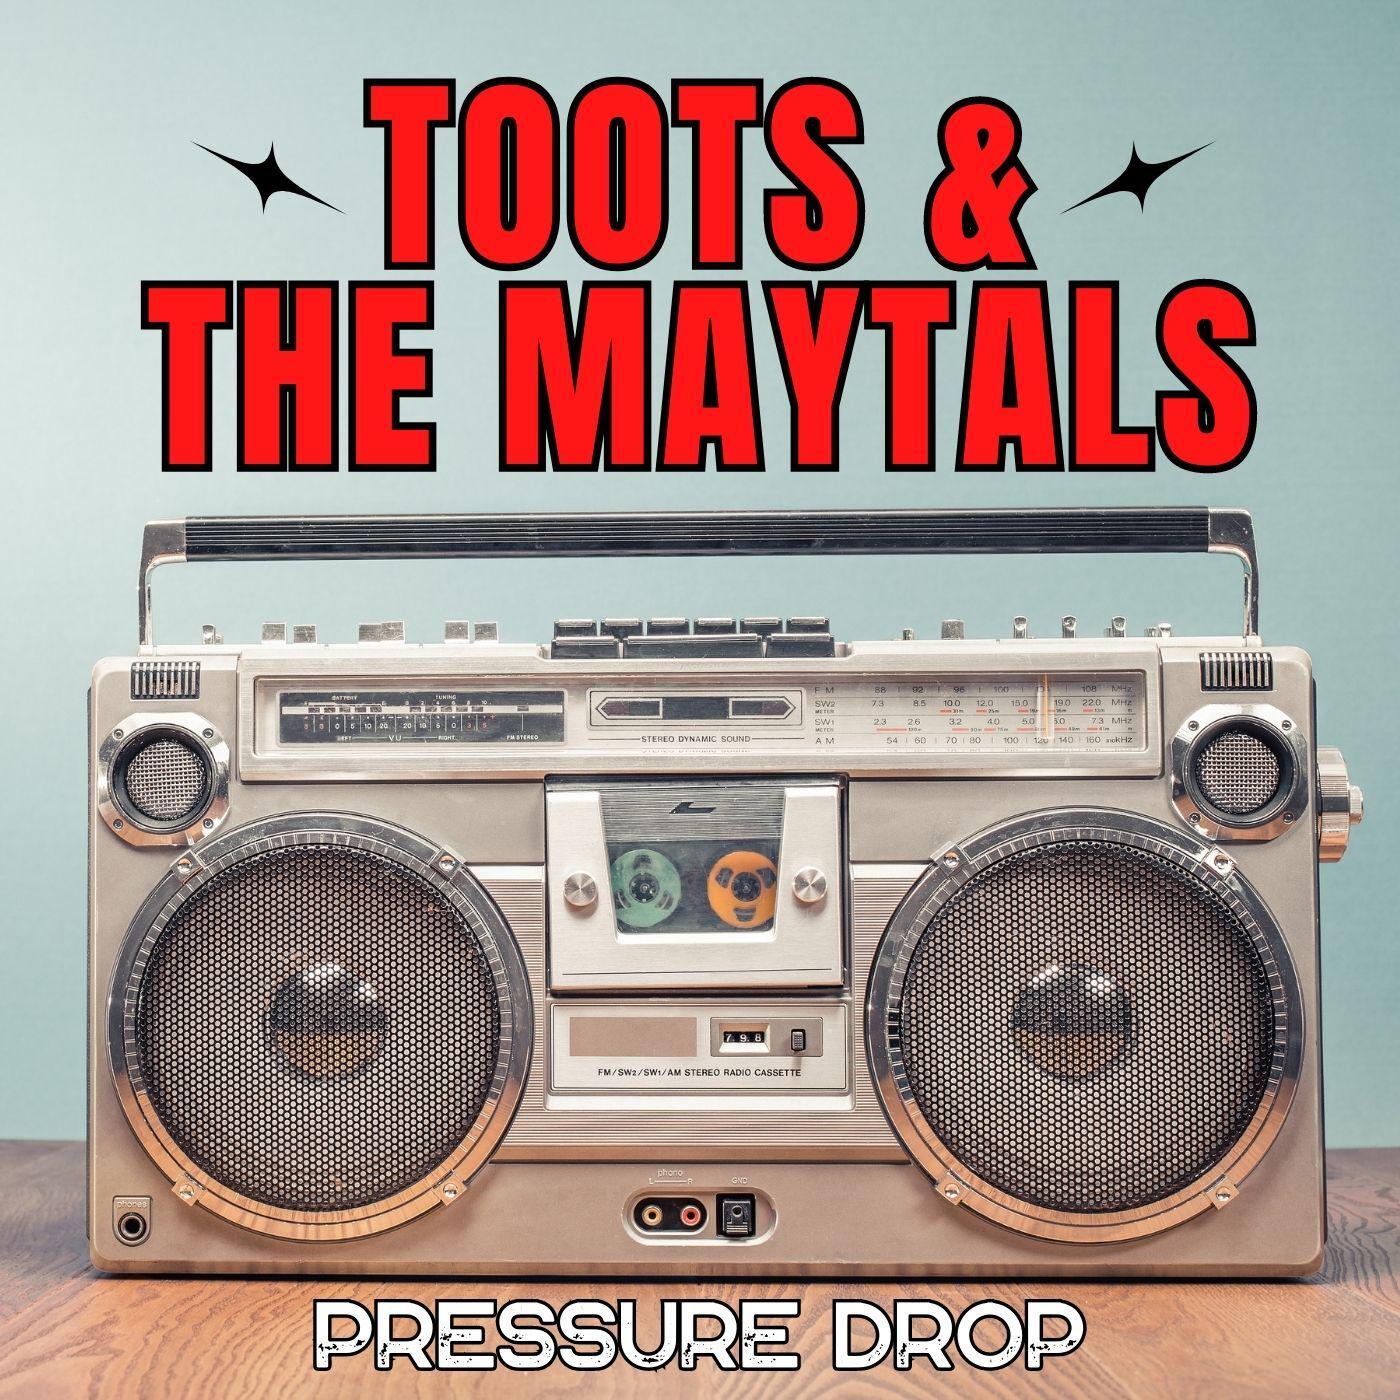 Toots & the Maytals - Bam Bam